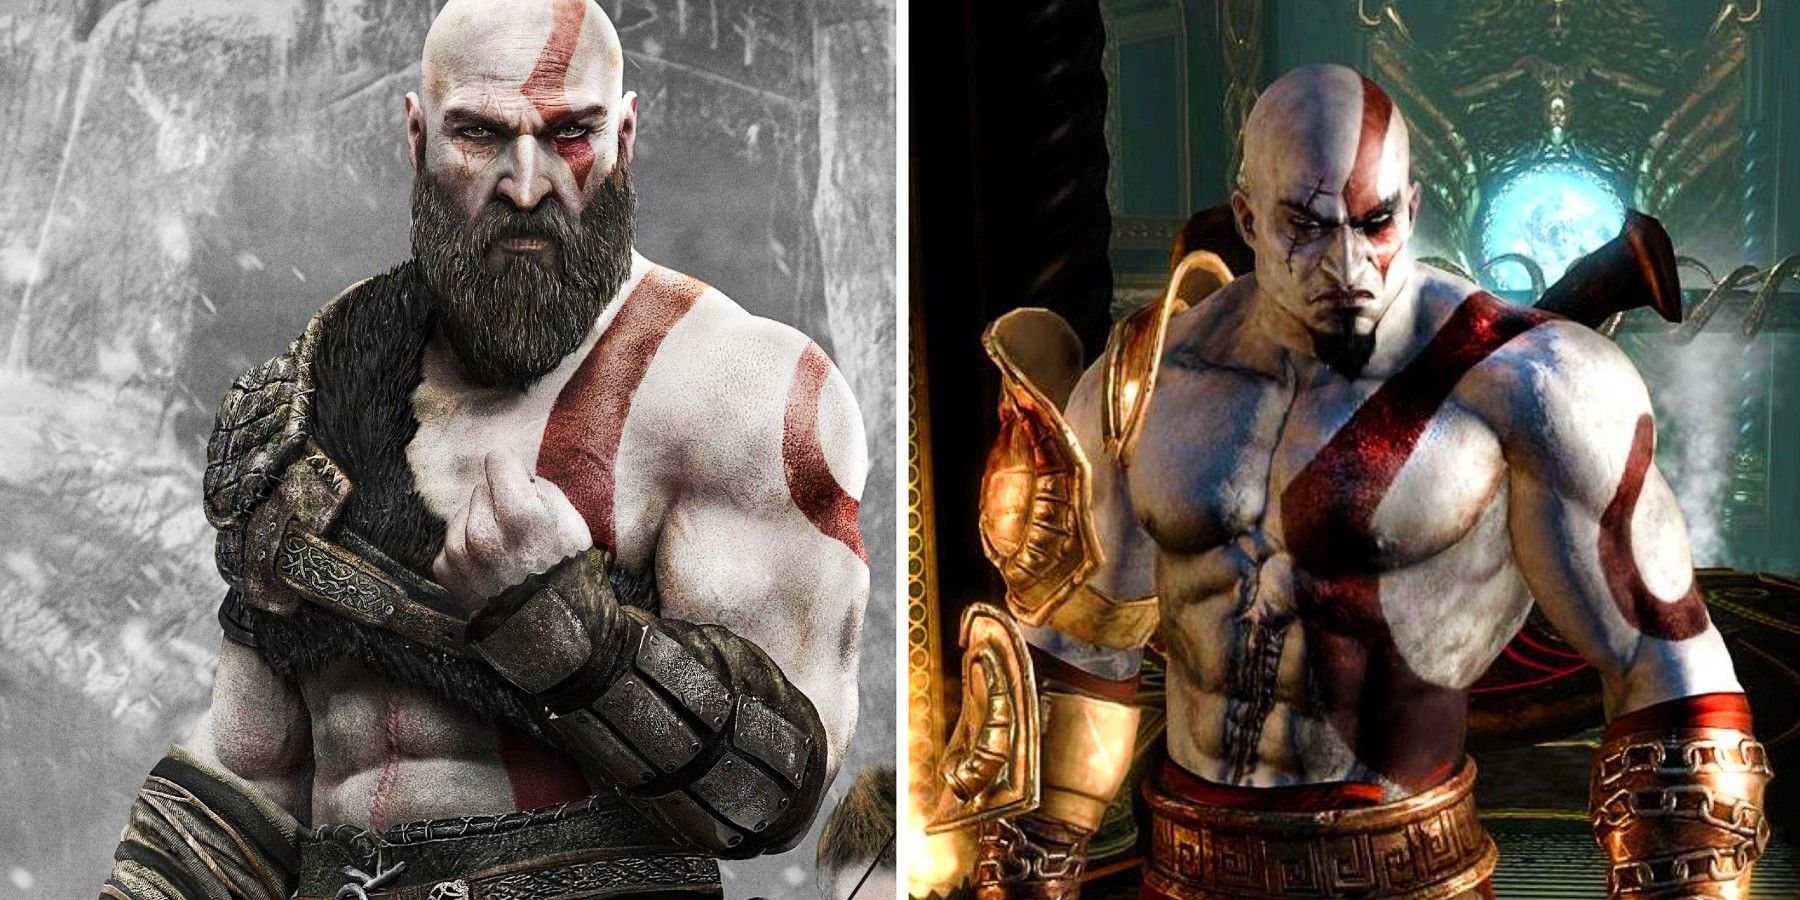 a side by side comparison of Old Kratos vs Young Kratos